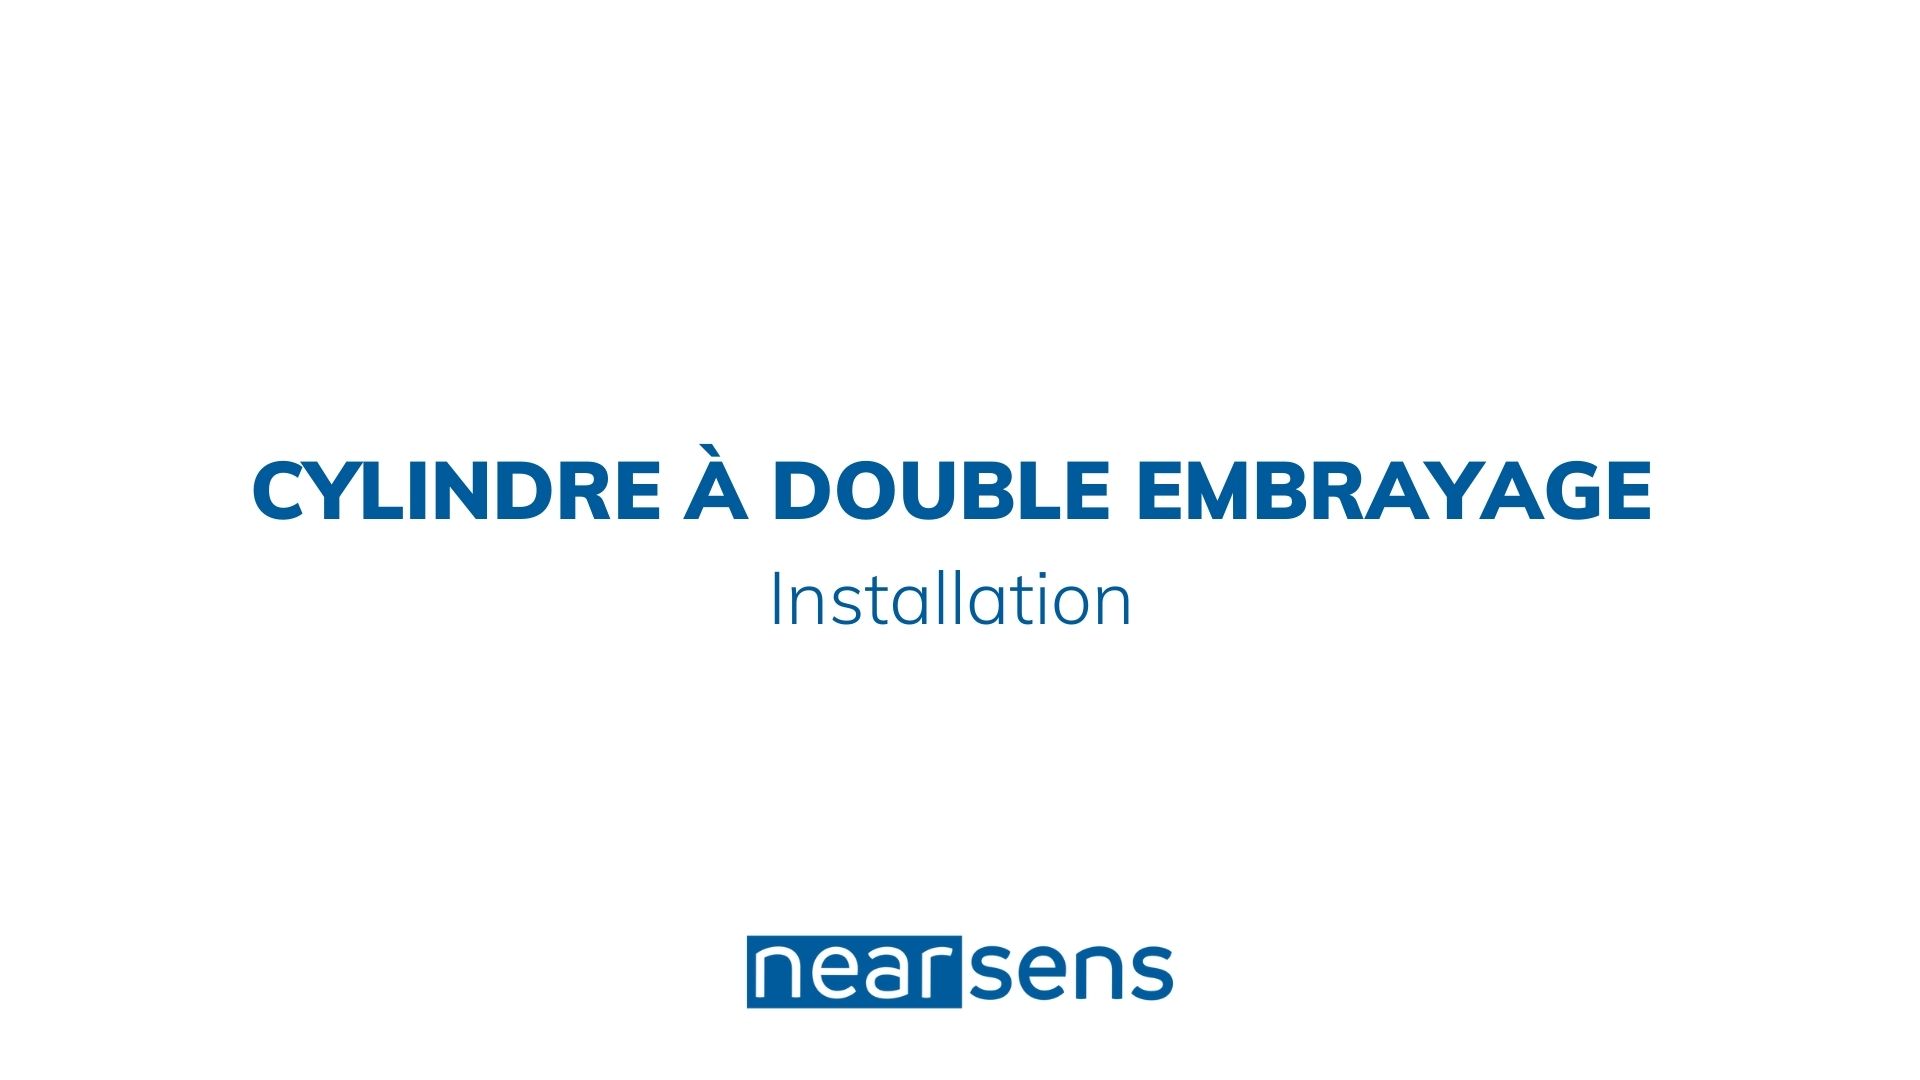 Le Cylindre à Double Embrayage : l'installation